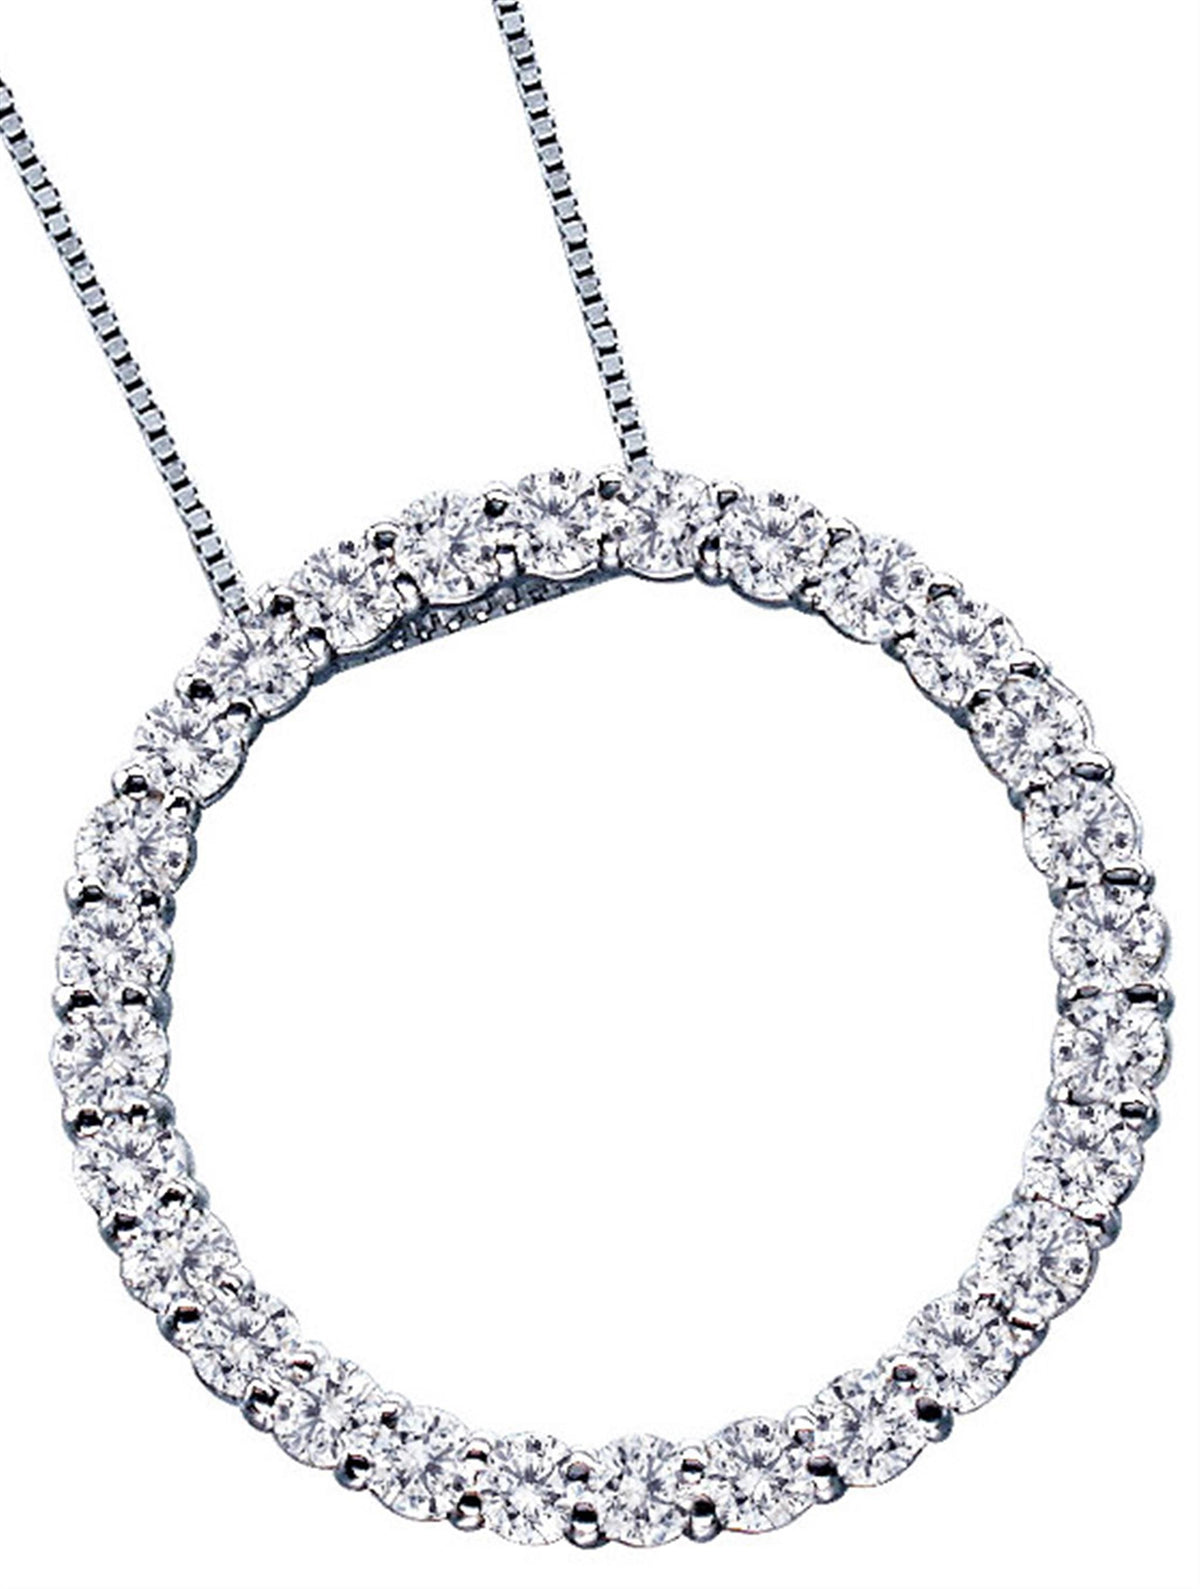 Circle Of Life 14Kt White Gold Pendant With 2.00cttw Lab-Grown Diamonds